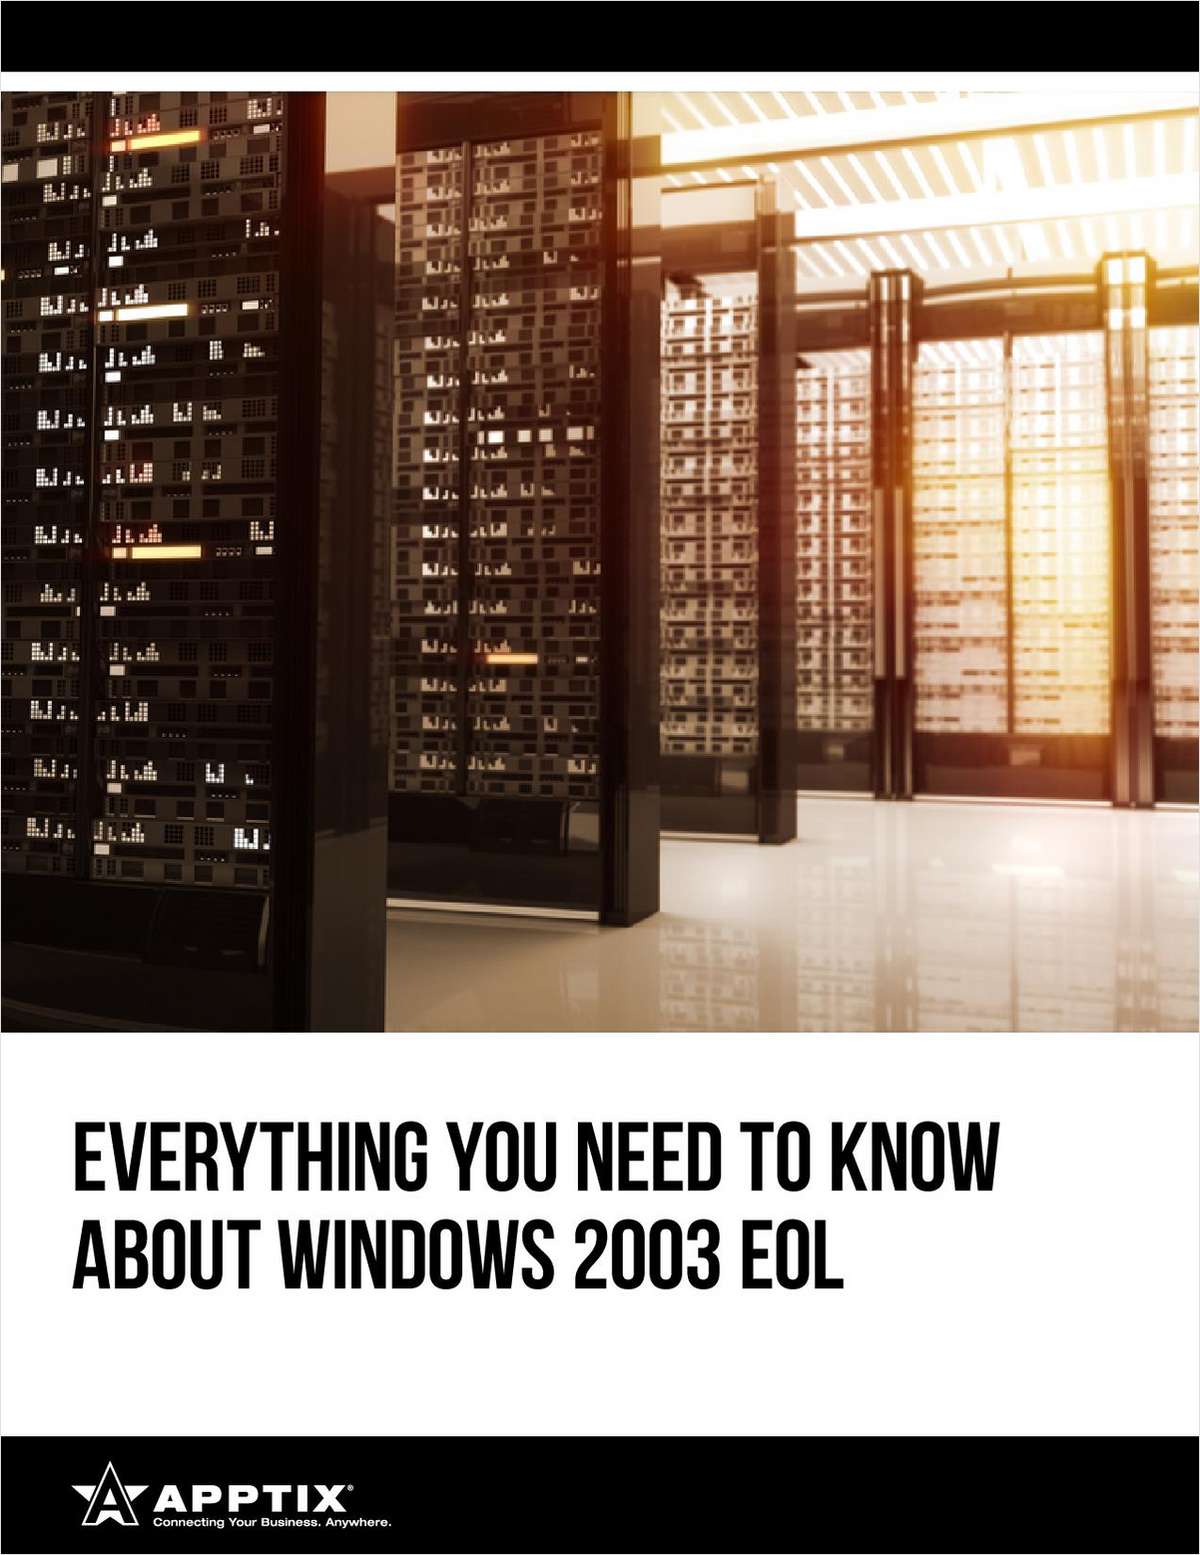 Everything You Need To Know About Windows 2003 End of Life